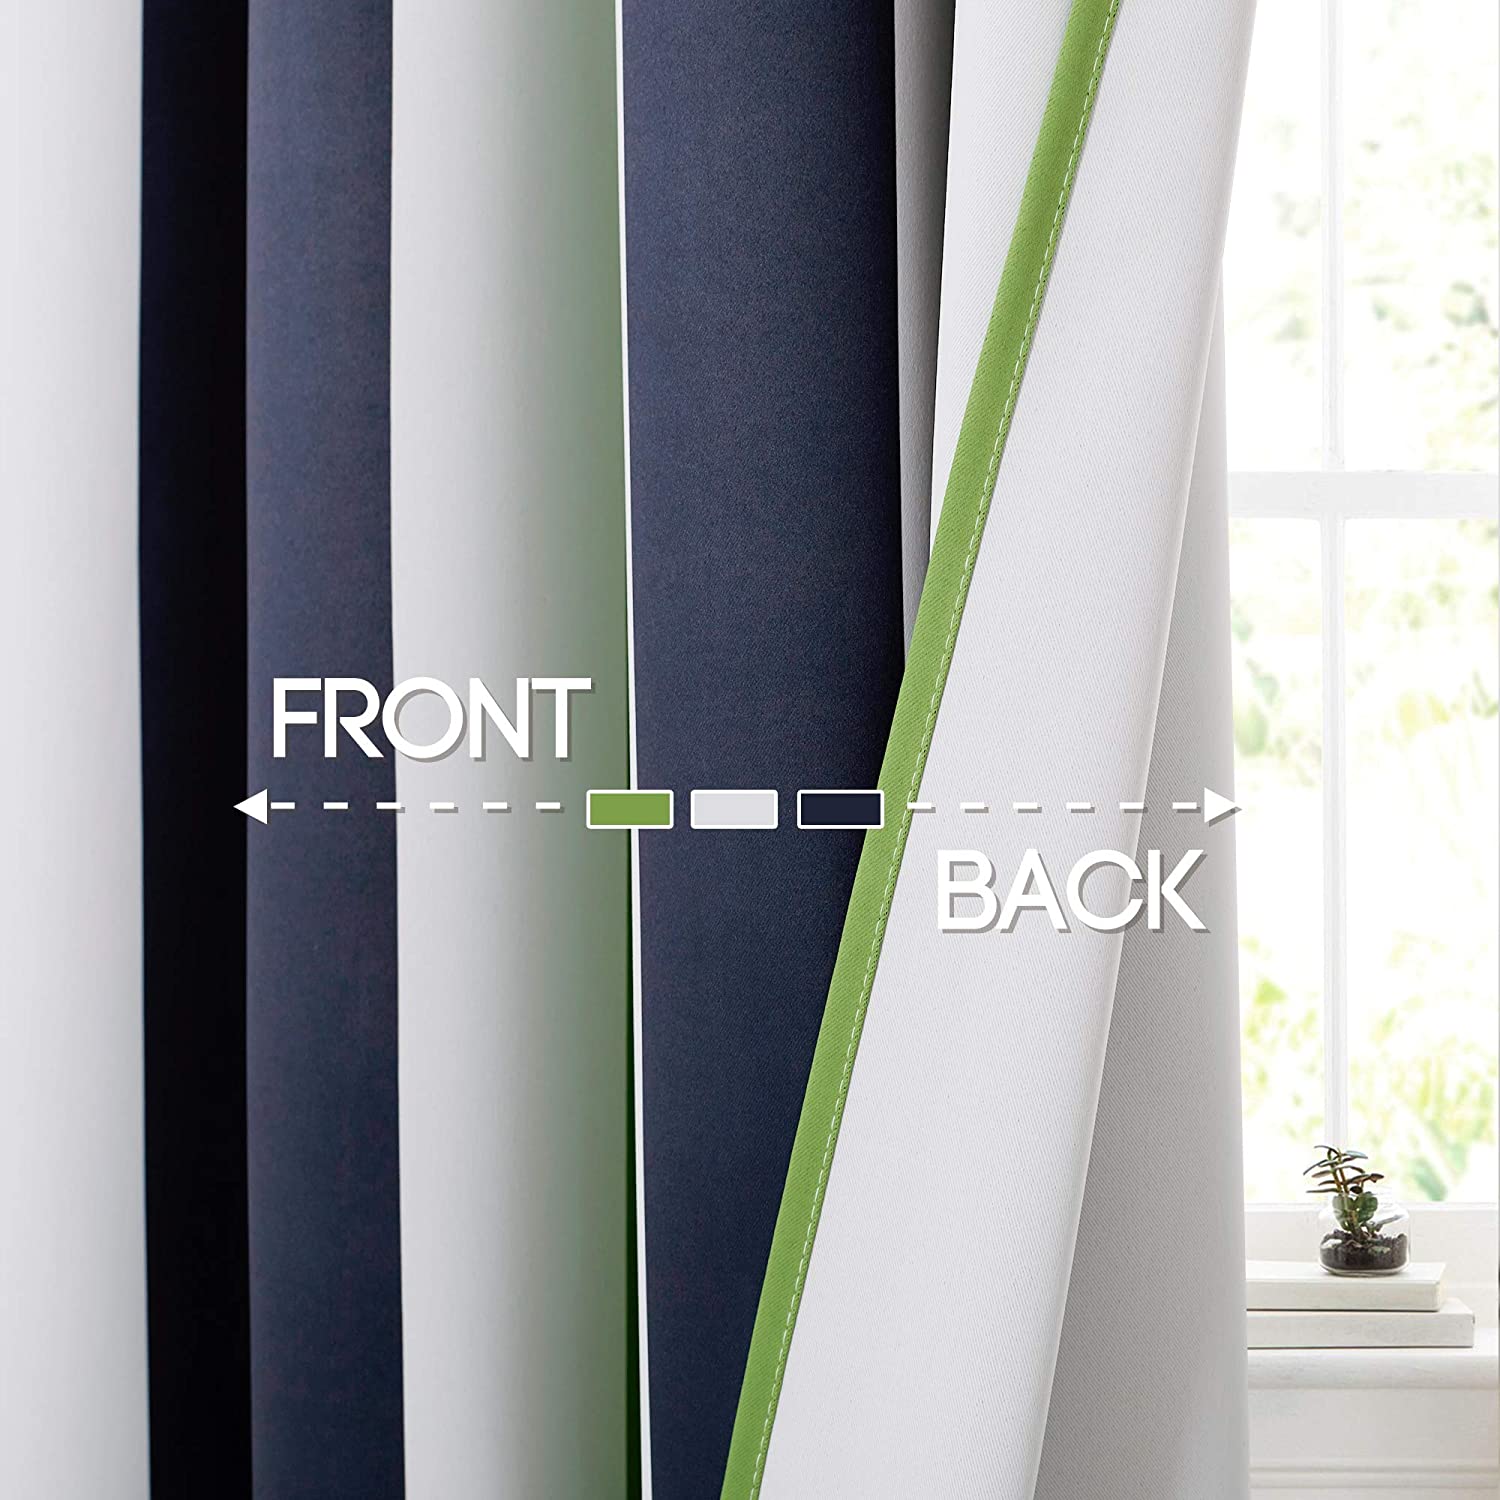 Modern Rainbow Grommet Polyester Blackout Cafe Curtains For Kitchen And Living Room 1 Pair KGORGE Store